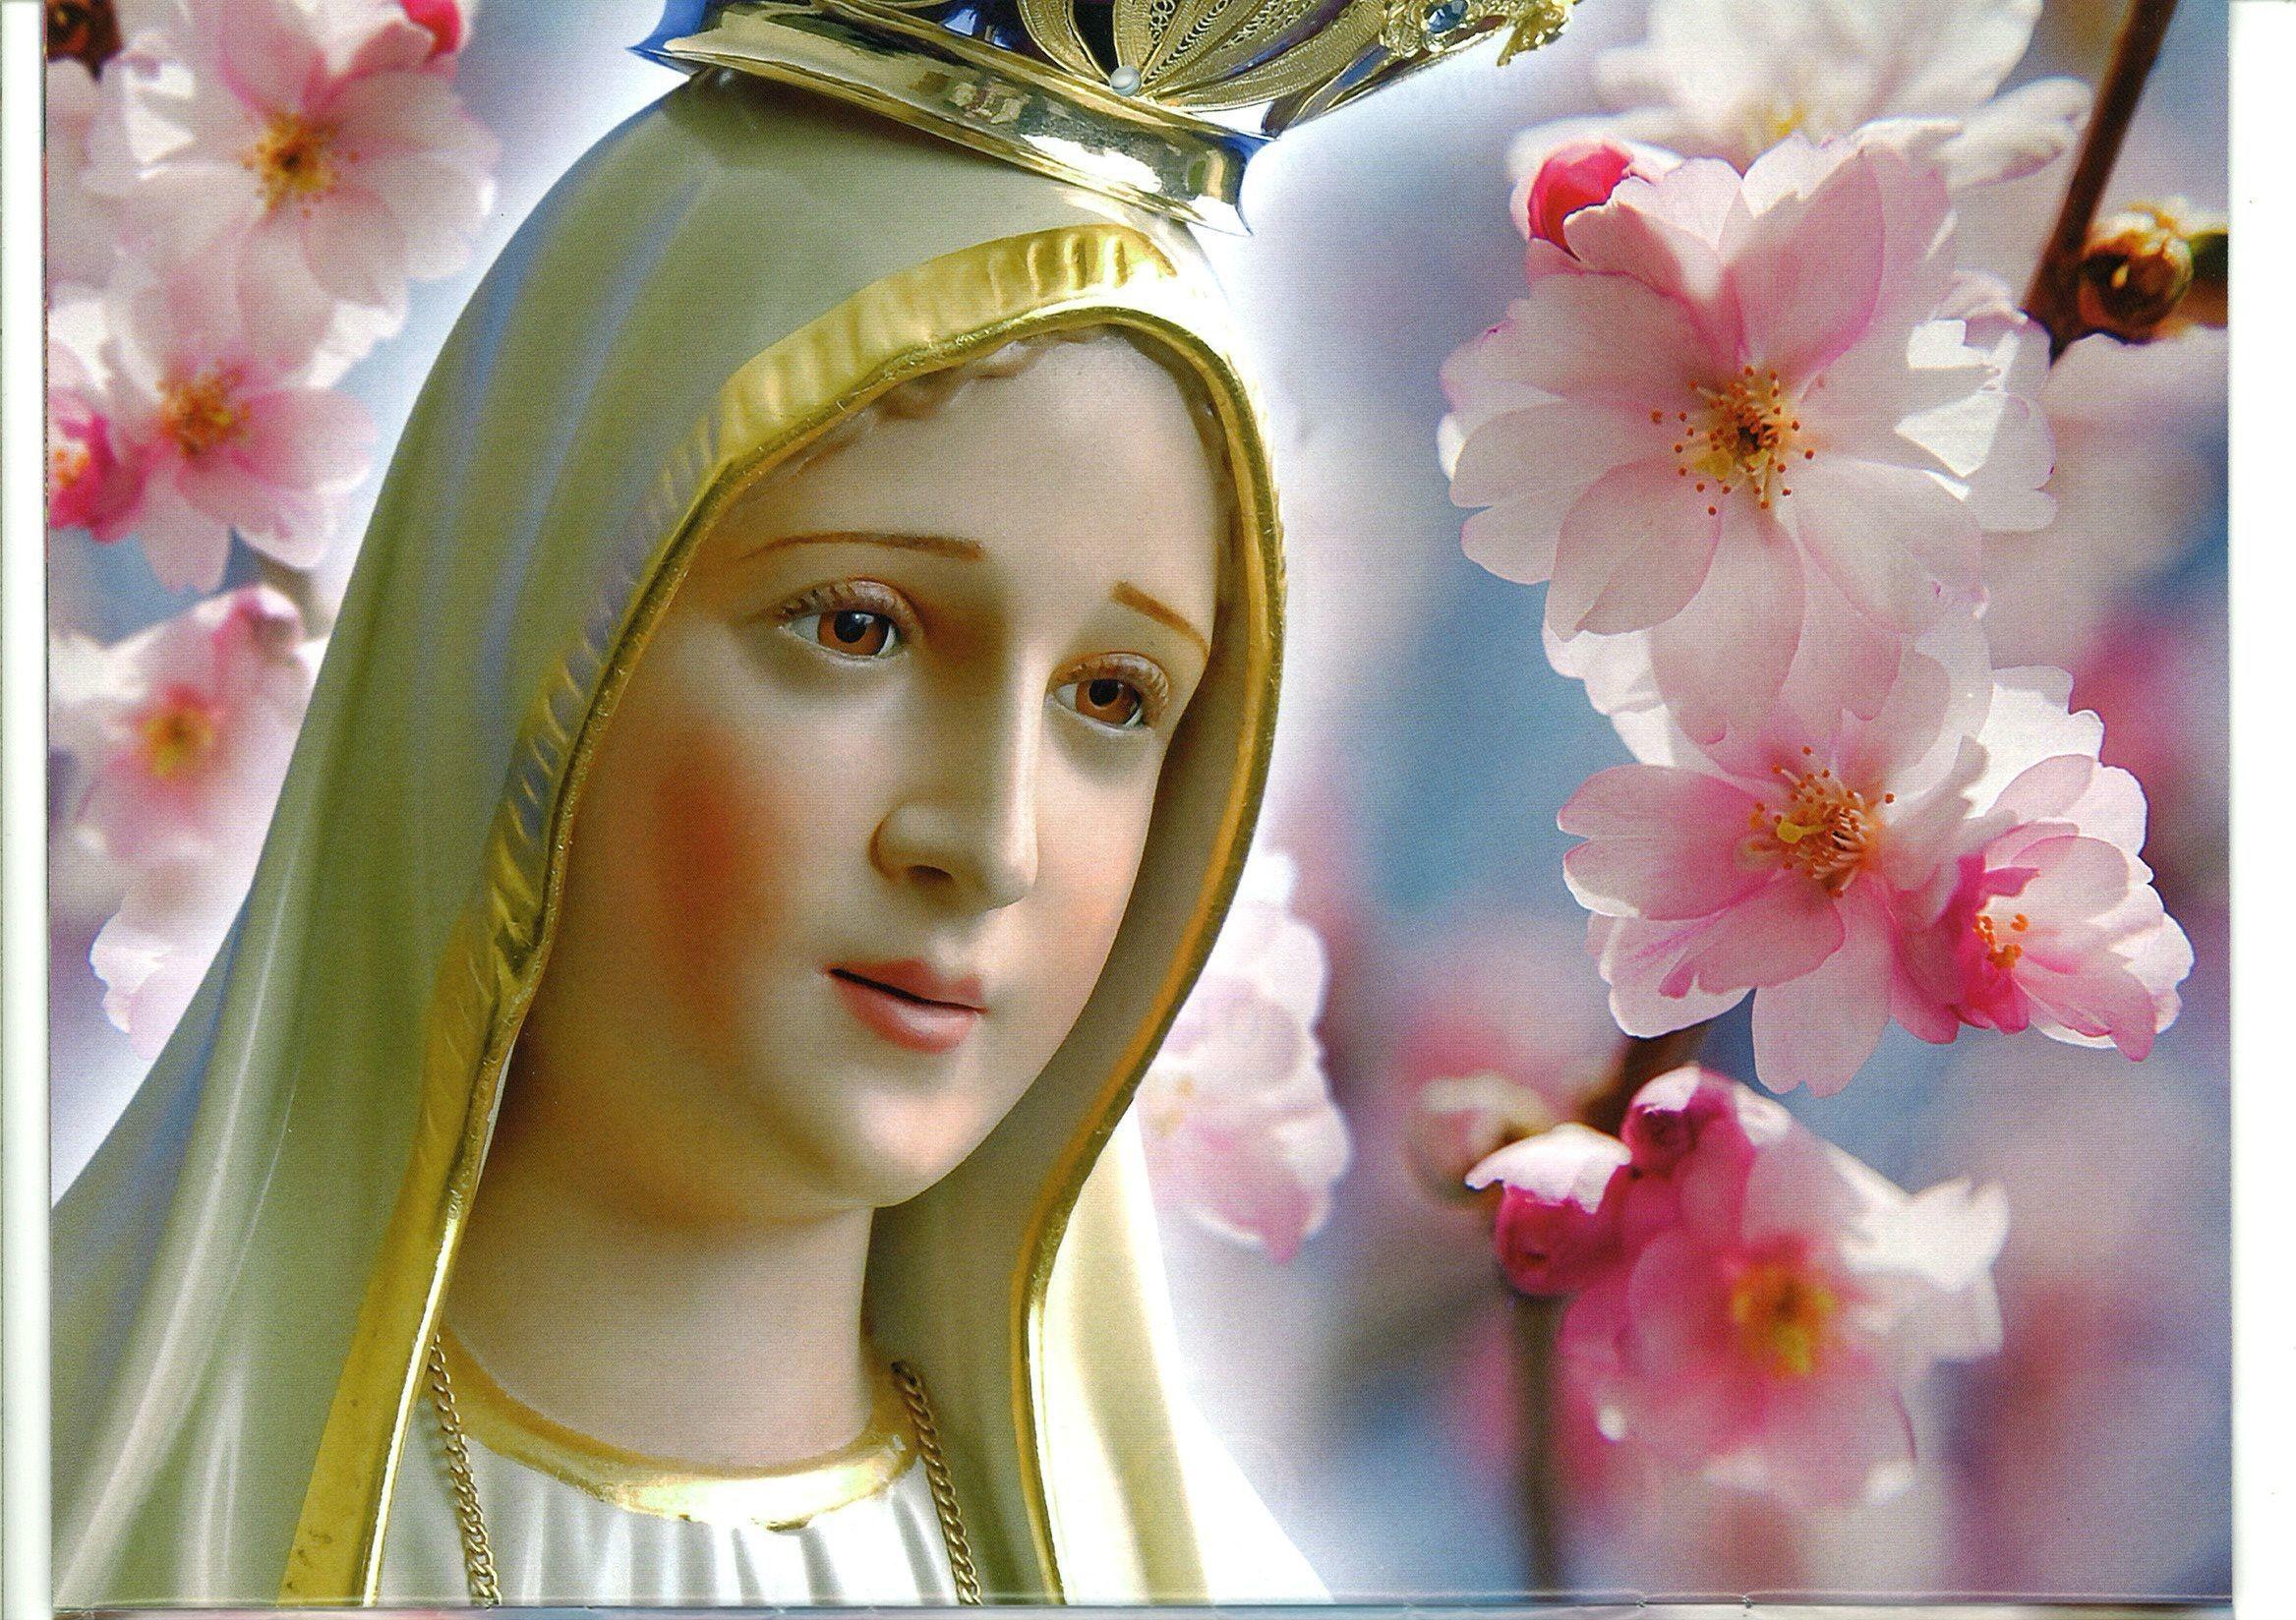 97+] Mother Mary Heart Mobile Wallpapers - WallpaperSafari